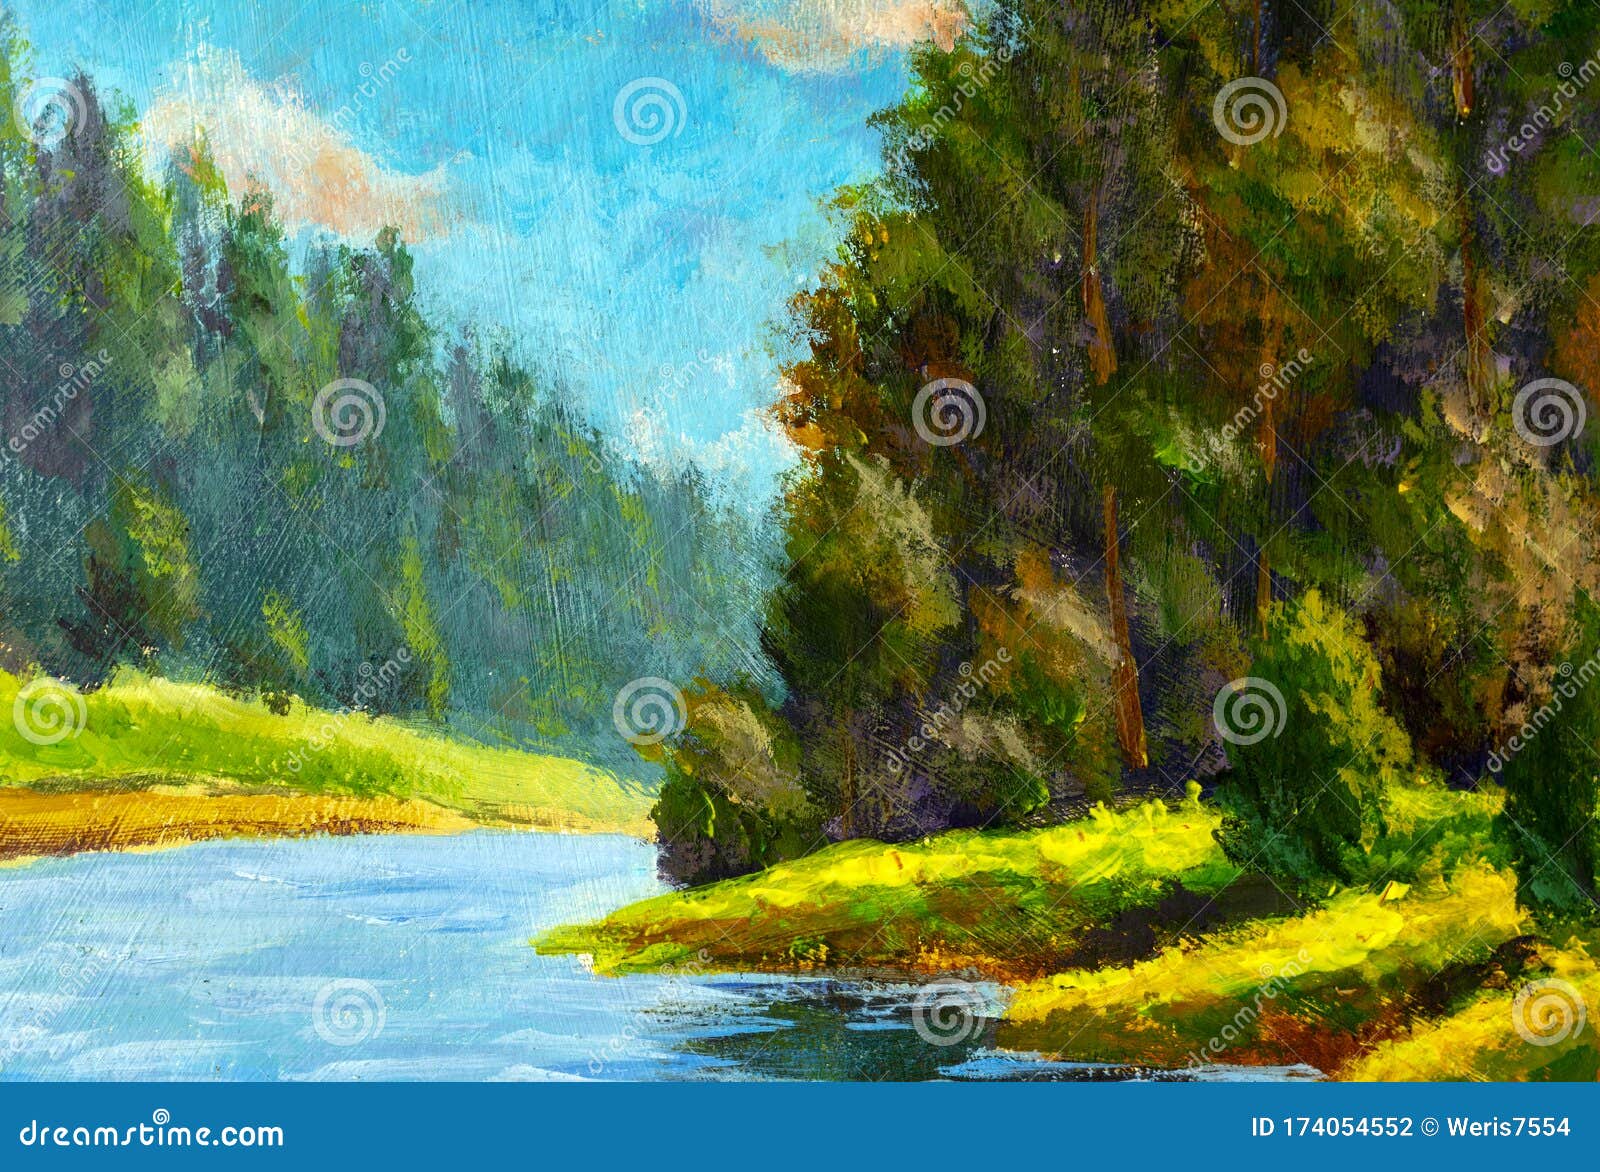 Beautiful River Landscape Acrylic Painting. Russian Forest Summer Landscape In Watercolor, Oil. Green Forest Stock Photo - Image Of Blue, Russian: 174054552